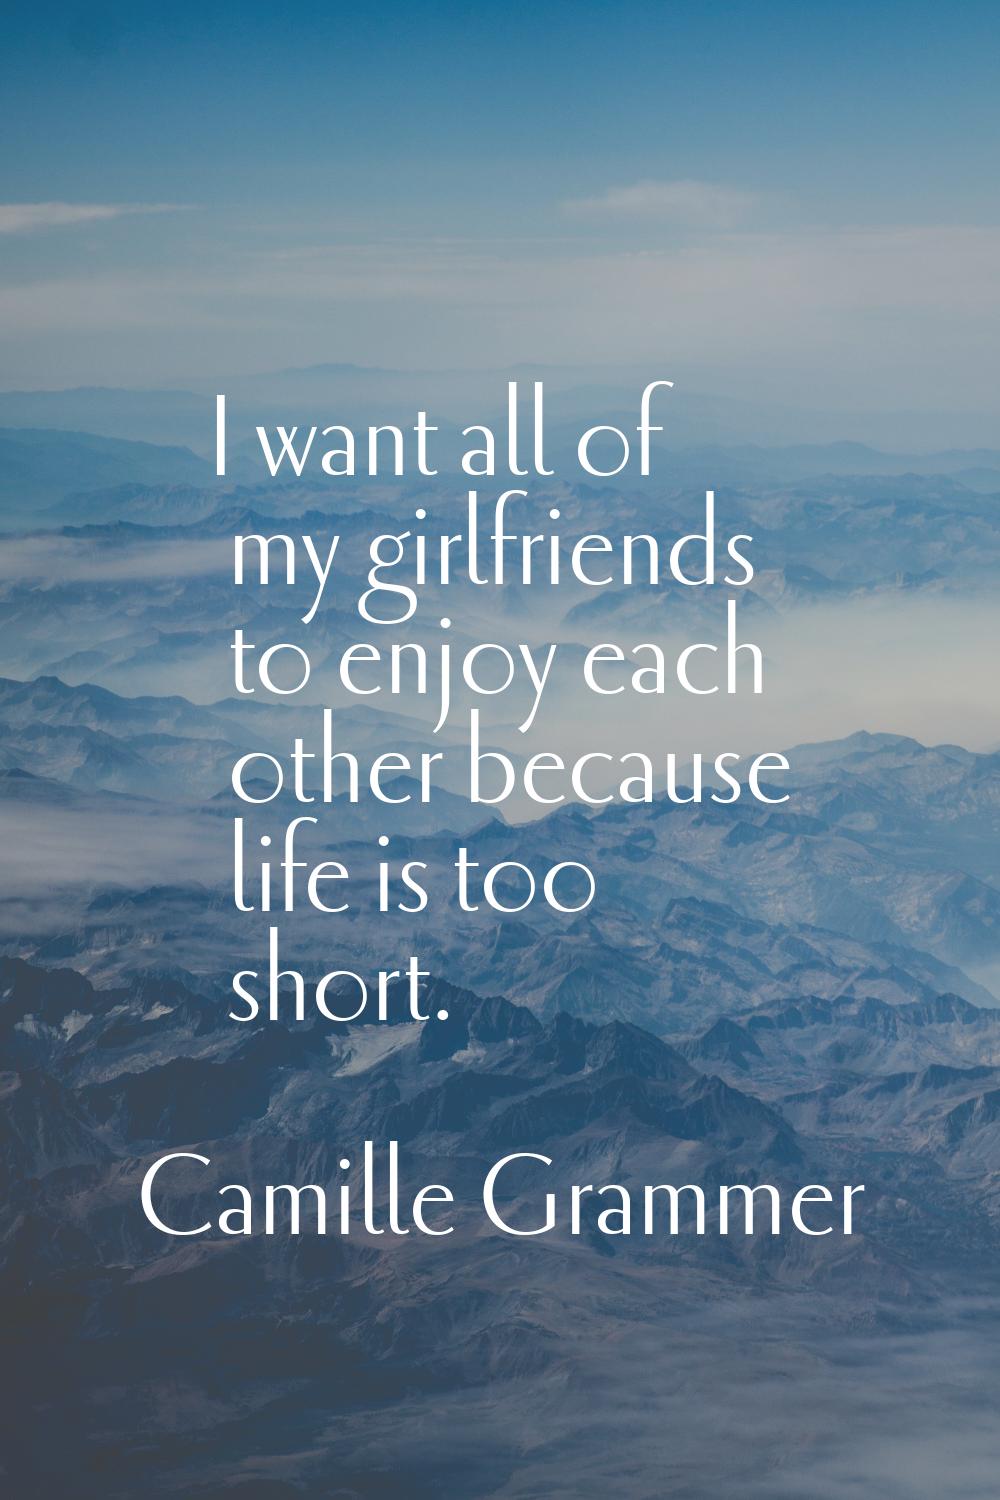 I want all of my girlfriends to enjoy each other because life is too short.